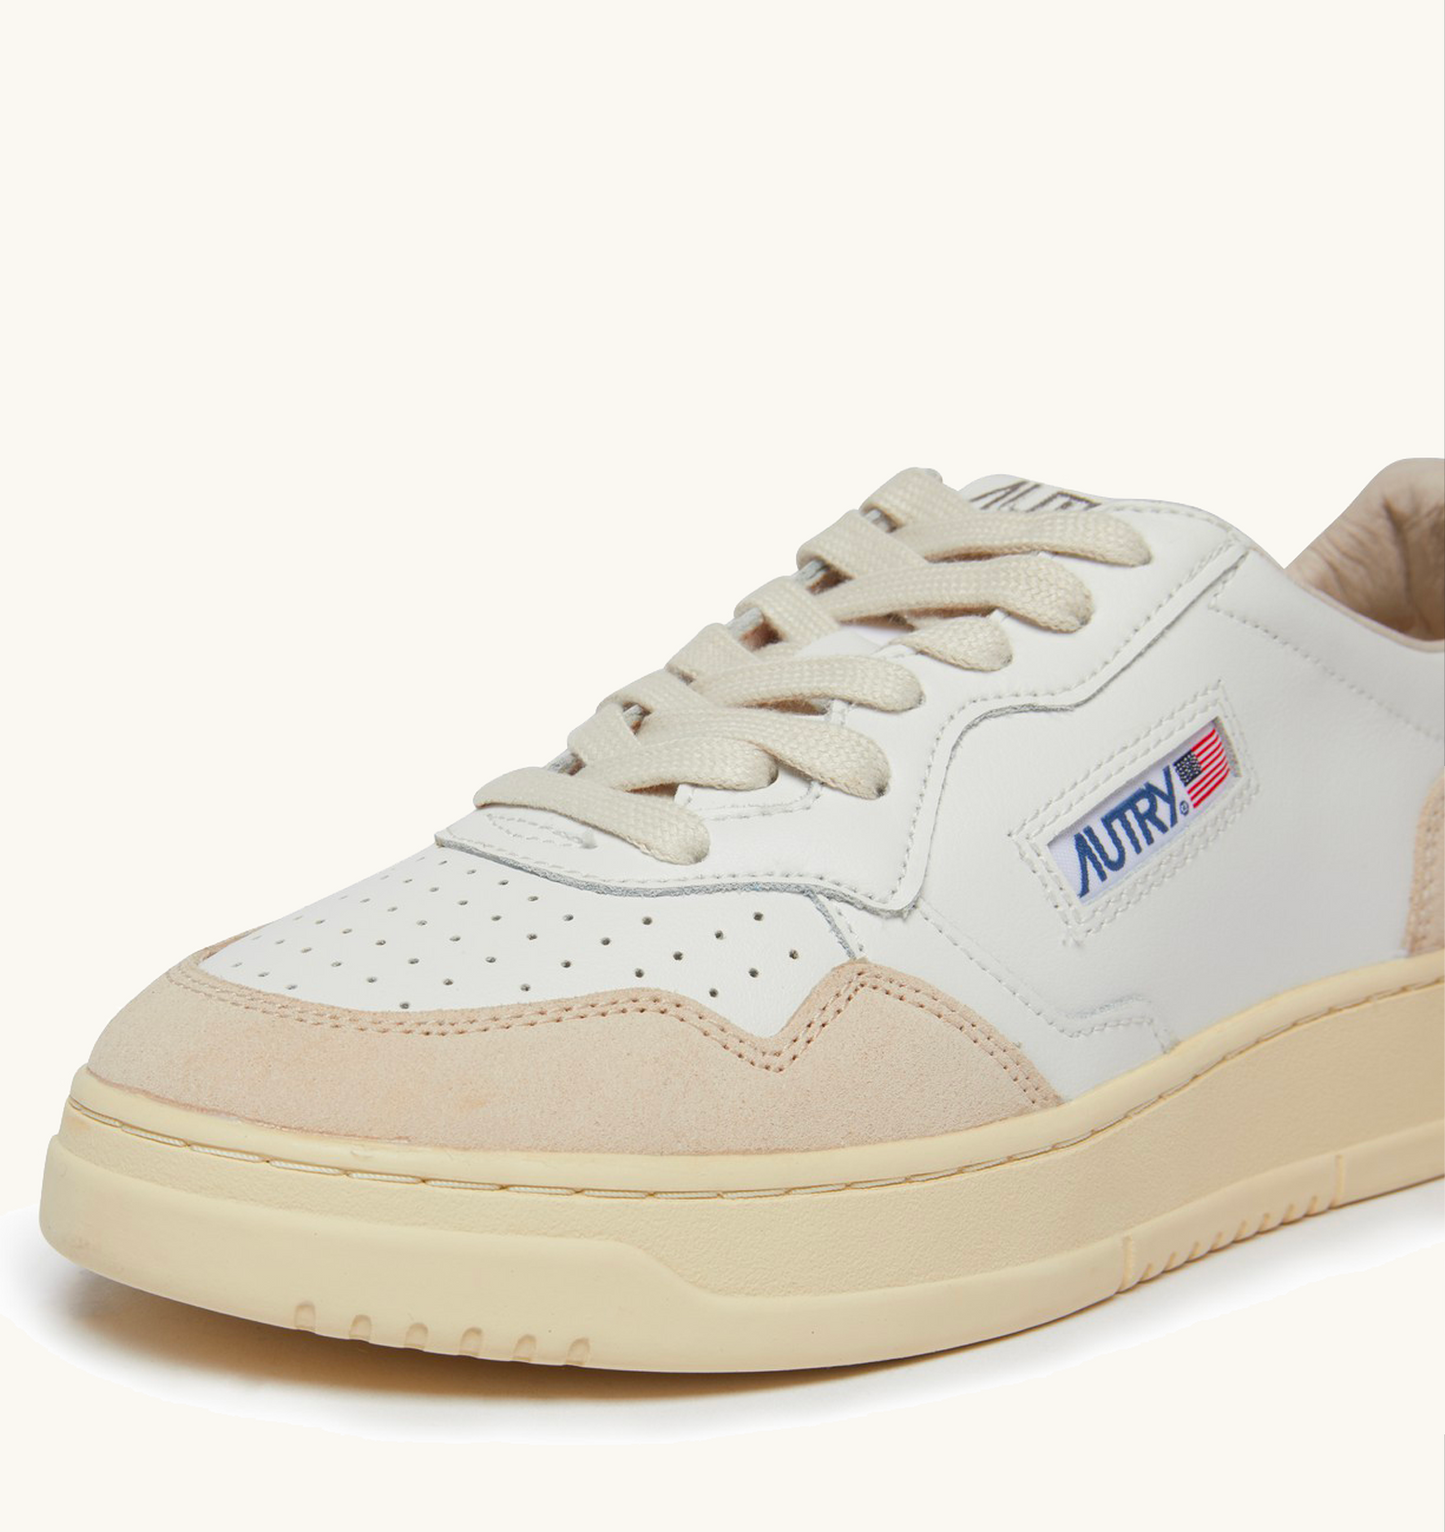 MEDALIST LOW SUEDE/LEATHER WHITE/LAVANDE